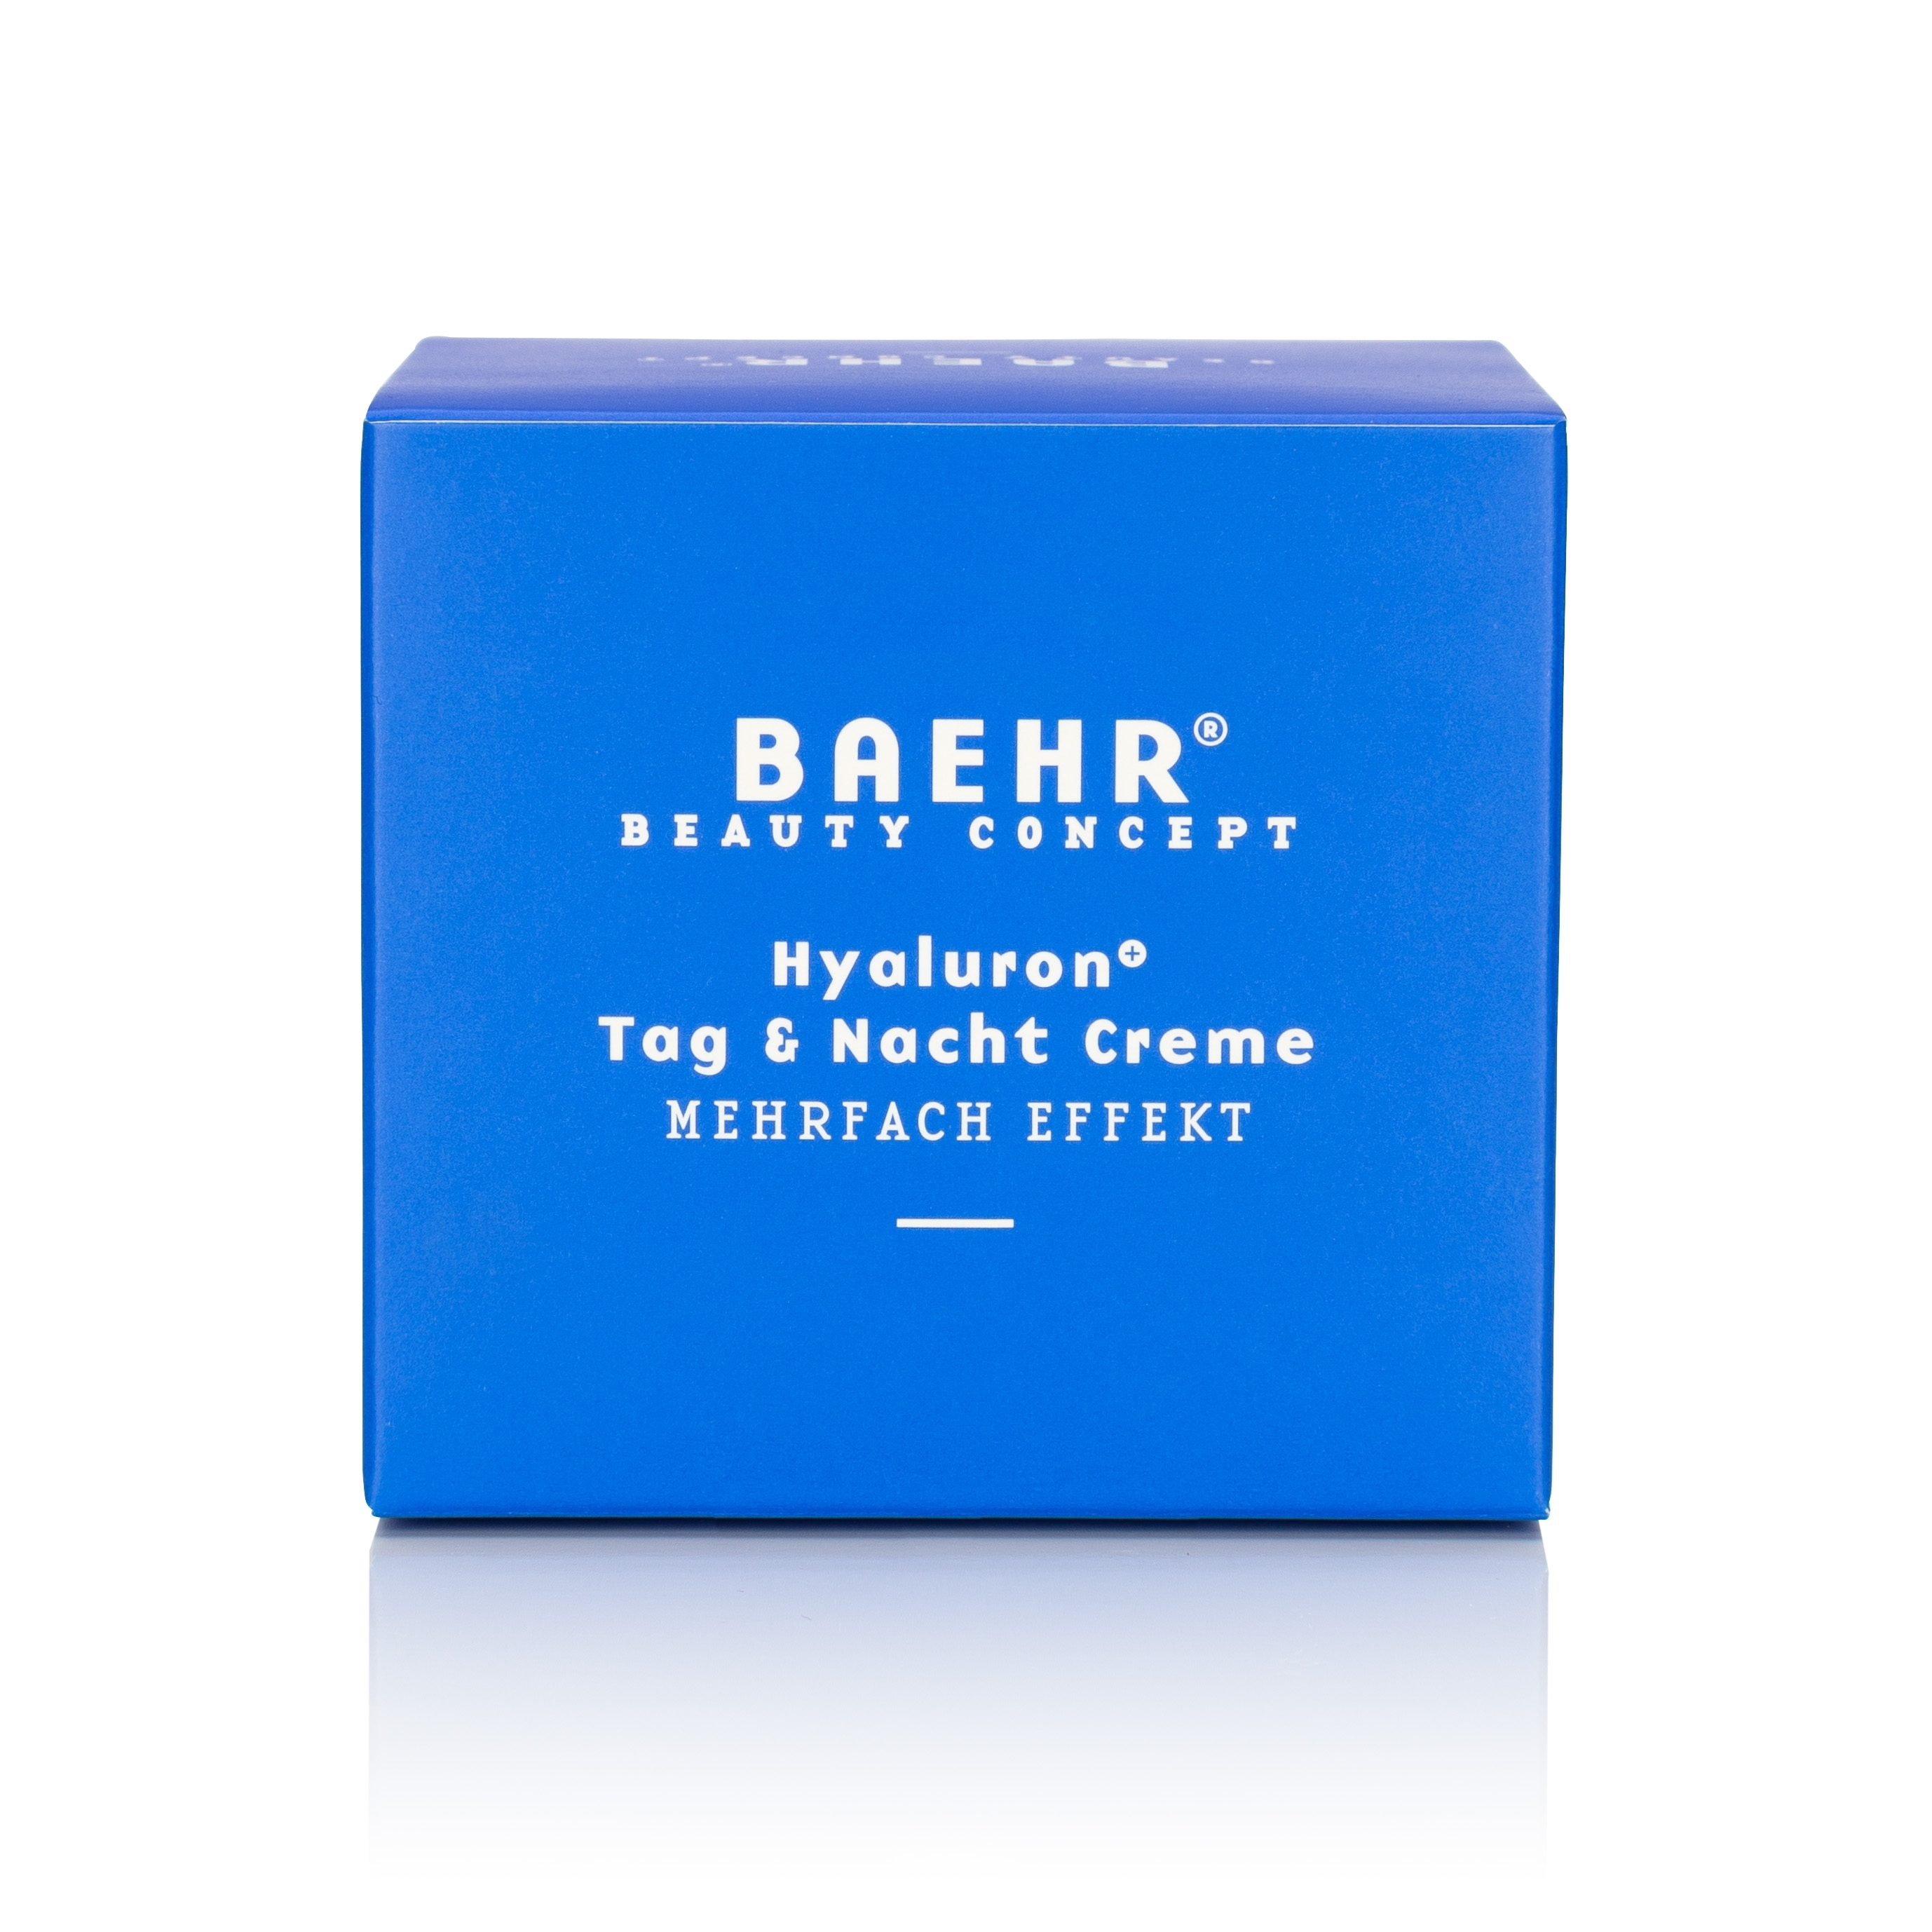 BAEHR BEAUTY CONCEPT Hyaluron+ Tag & Nacht-Creme 50 ml